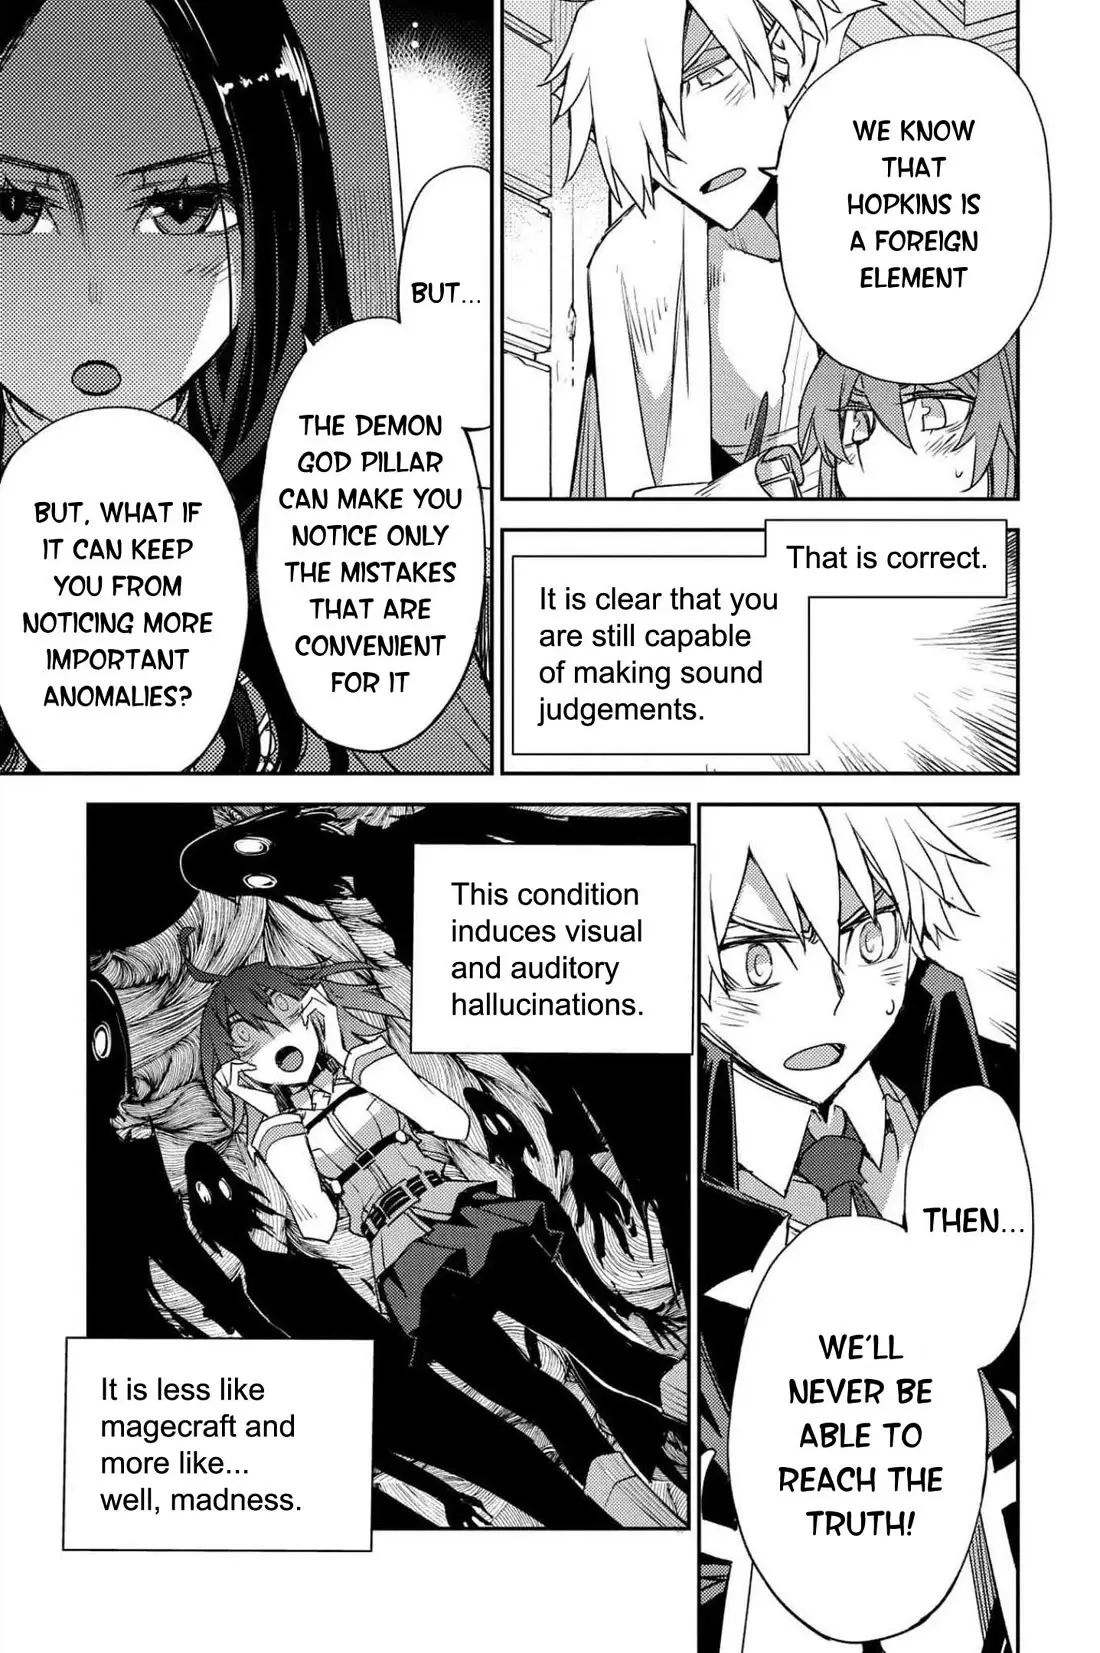 Fate/grand Order: Epic Of Remnant - Subspecies Singularity Iv: Taboo Advent Salem: Salem Of Heresy - 27 page 13-94b36767